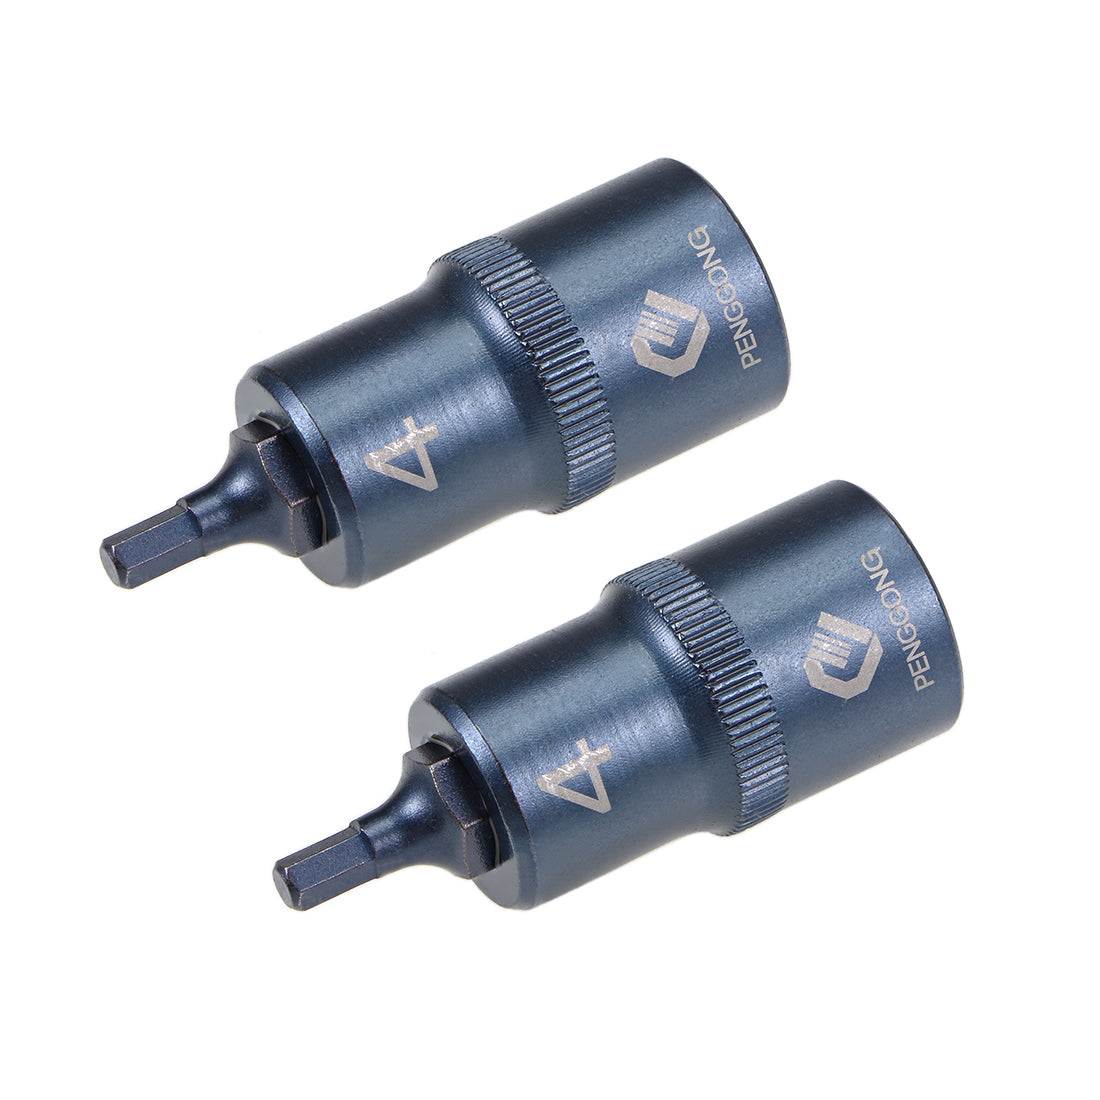 uxcell Uxcell Drive x Hex Bit Socket, S2 Steel Bits, CR-V Sockets Metric (For Hand Use Only)